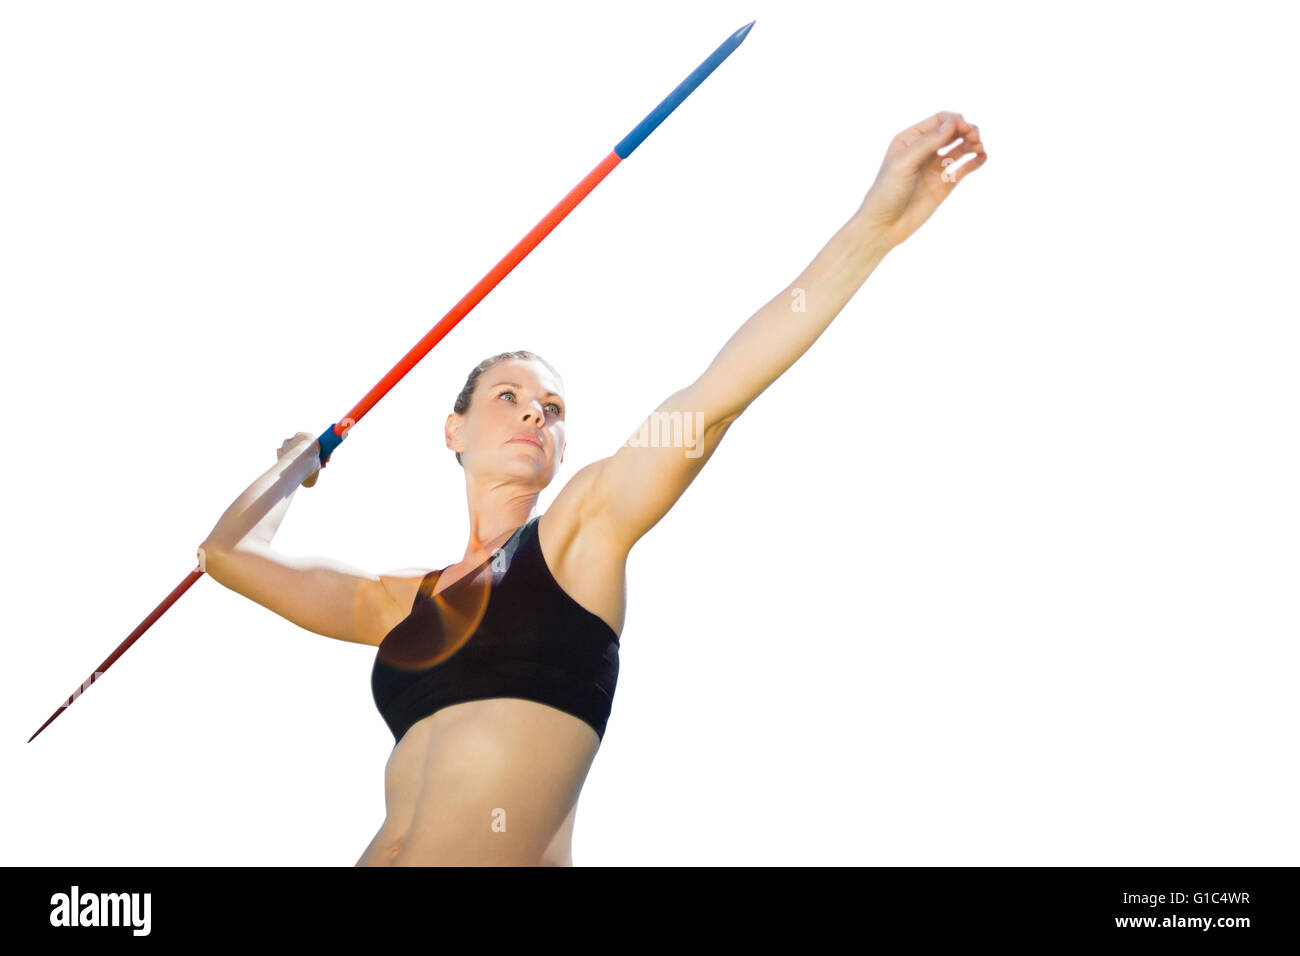 Low angle view of sportswoman is practising javelin throw Stock Photo